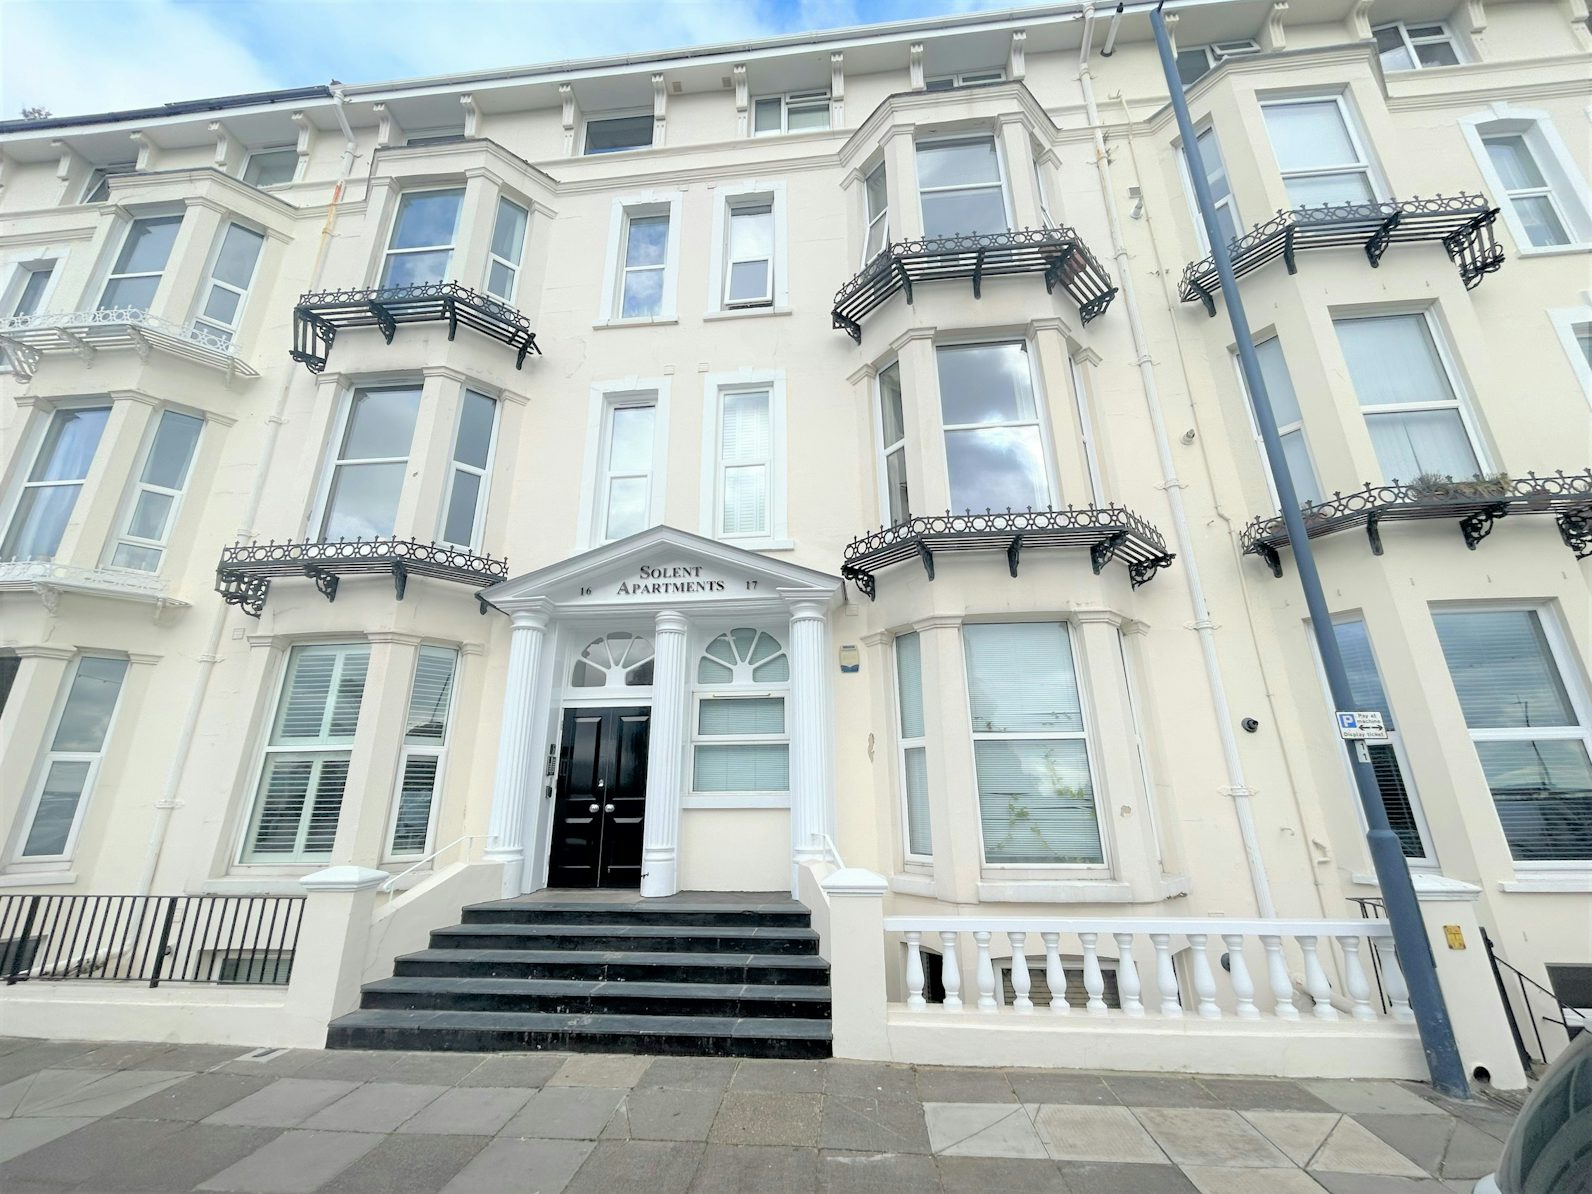 Flat to rent on 16-17 South Parade Southsea, Portsmouth, PO5